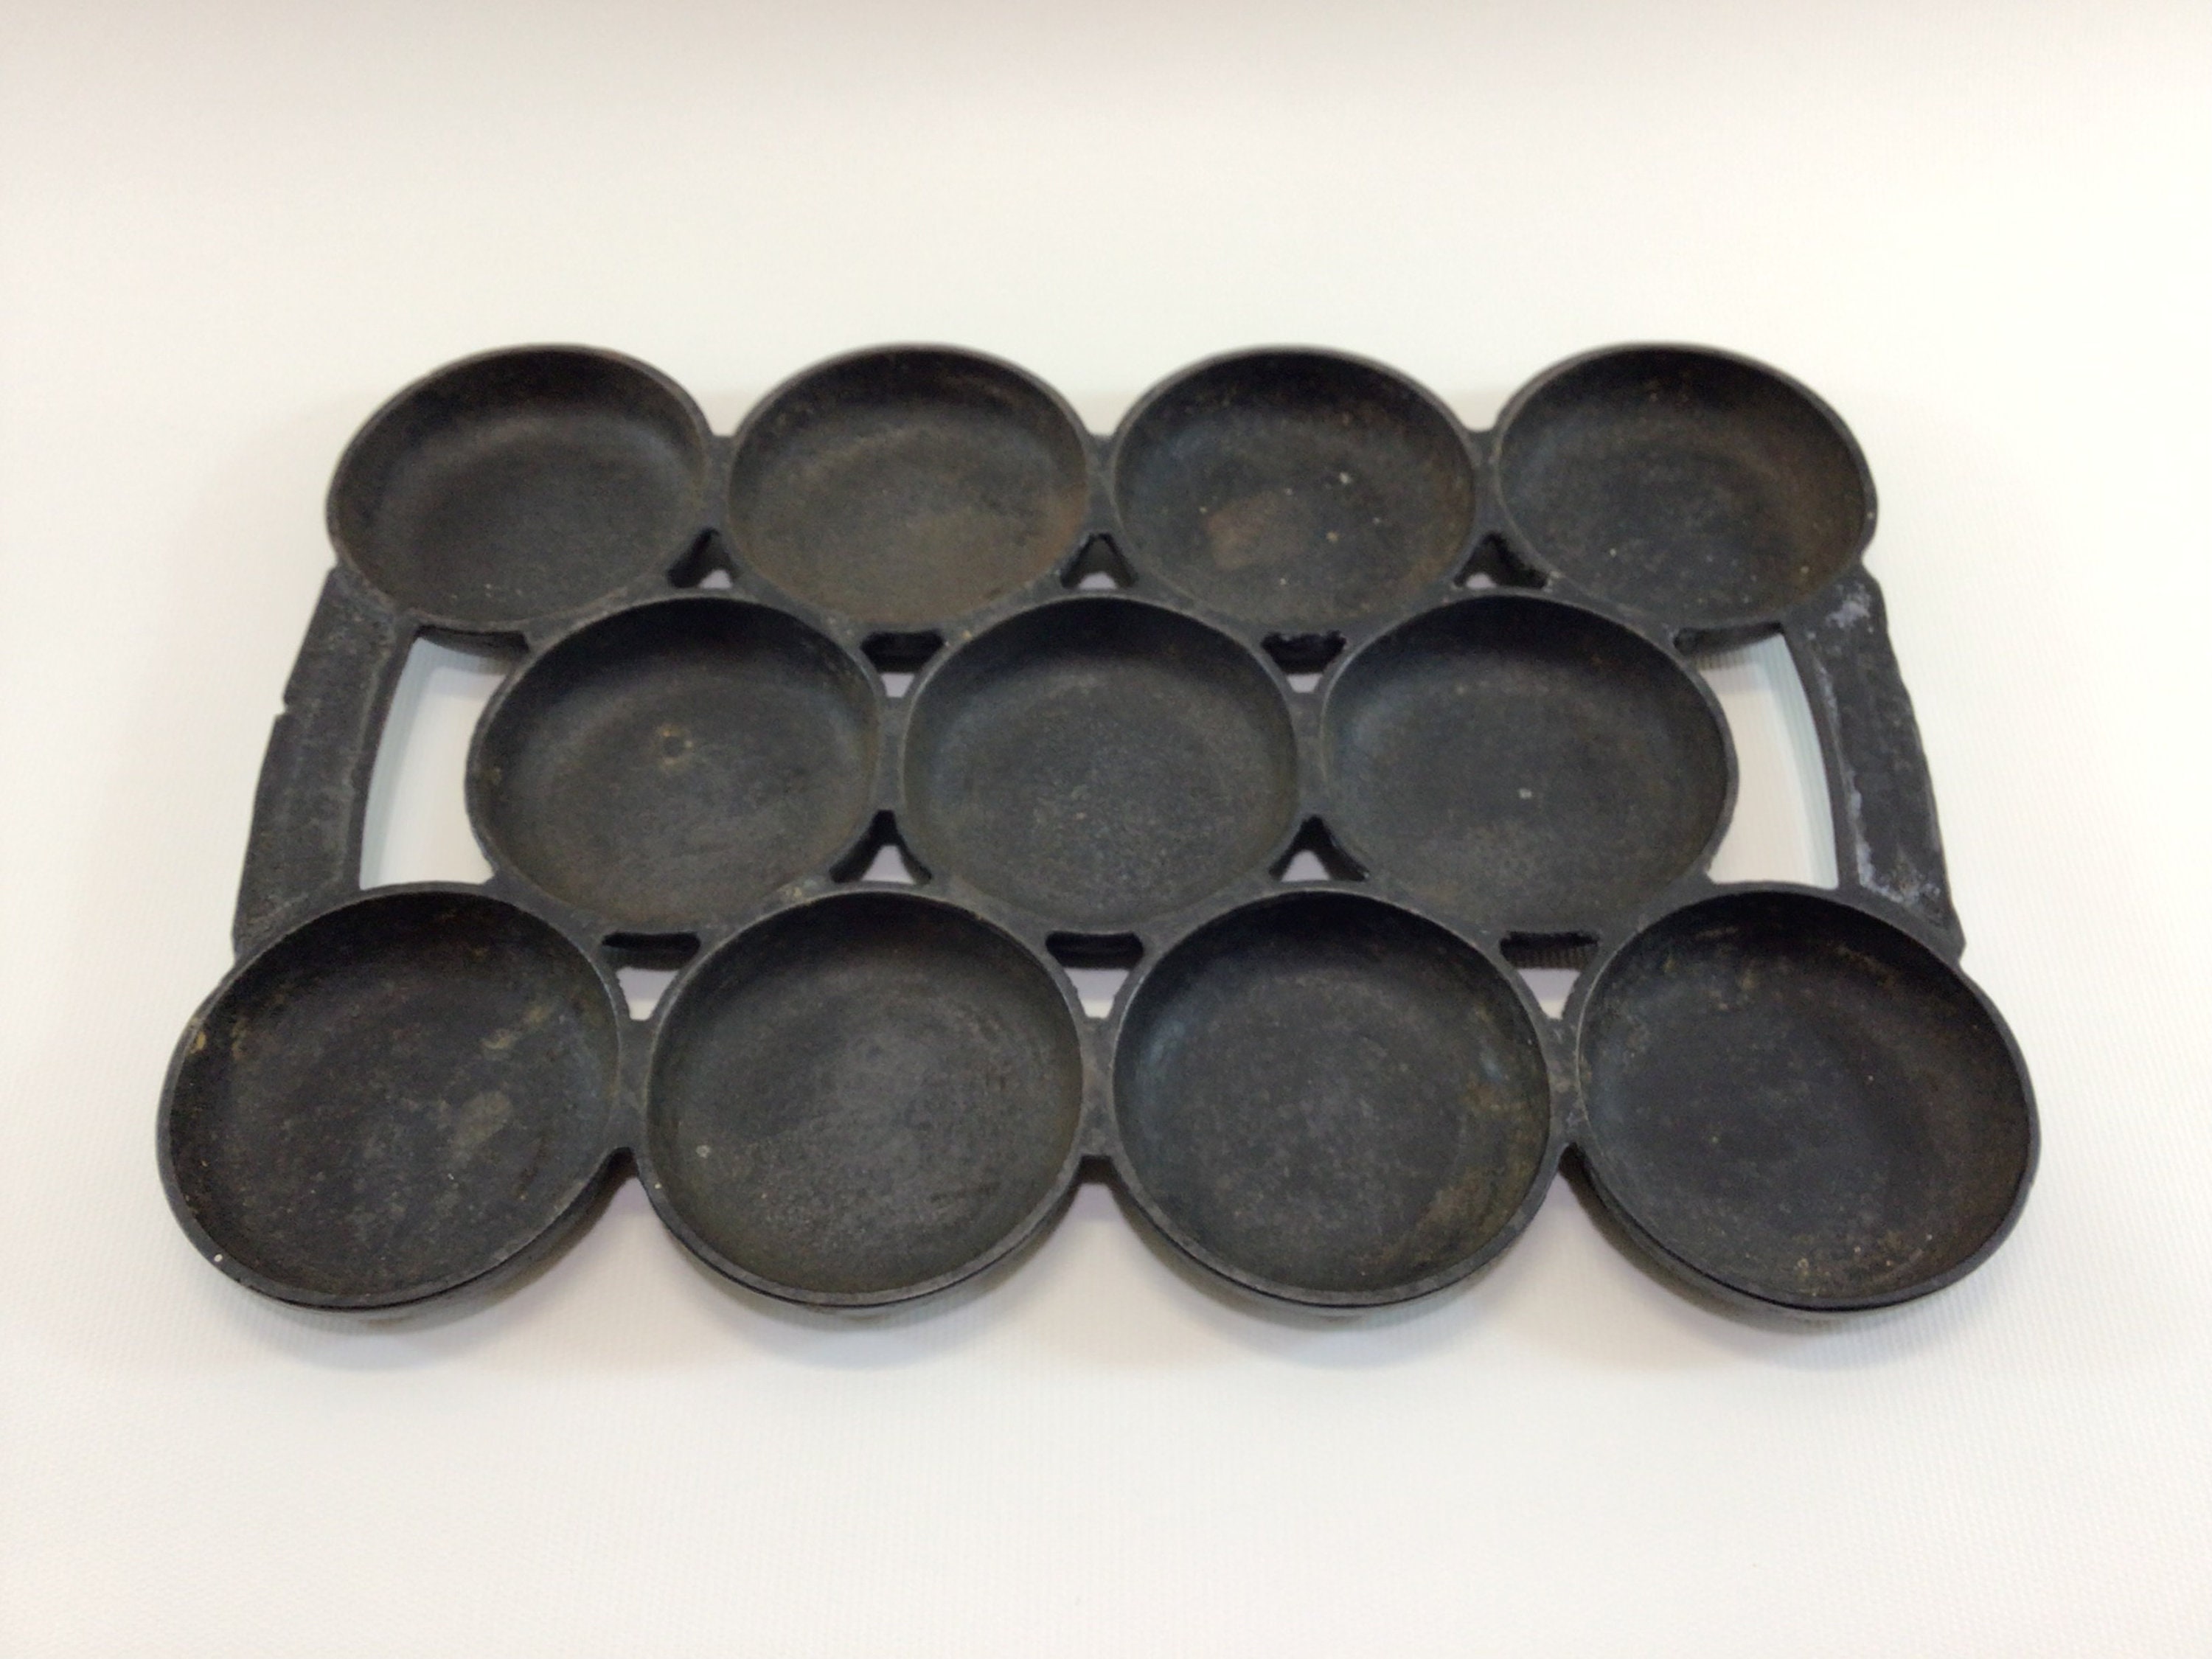 Camping or Indoor Cake Cupcake Mold Poffertjes Pan Cast Iron Muffin Pan for  Baking Biscuit